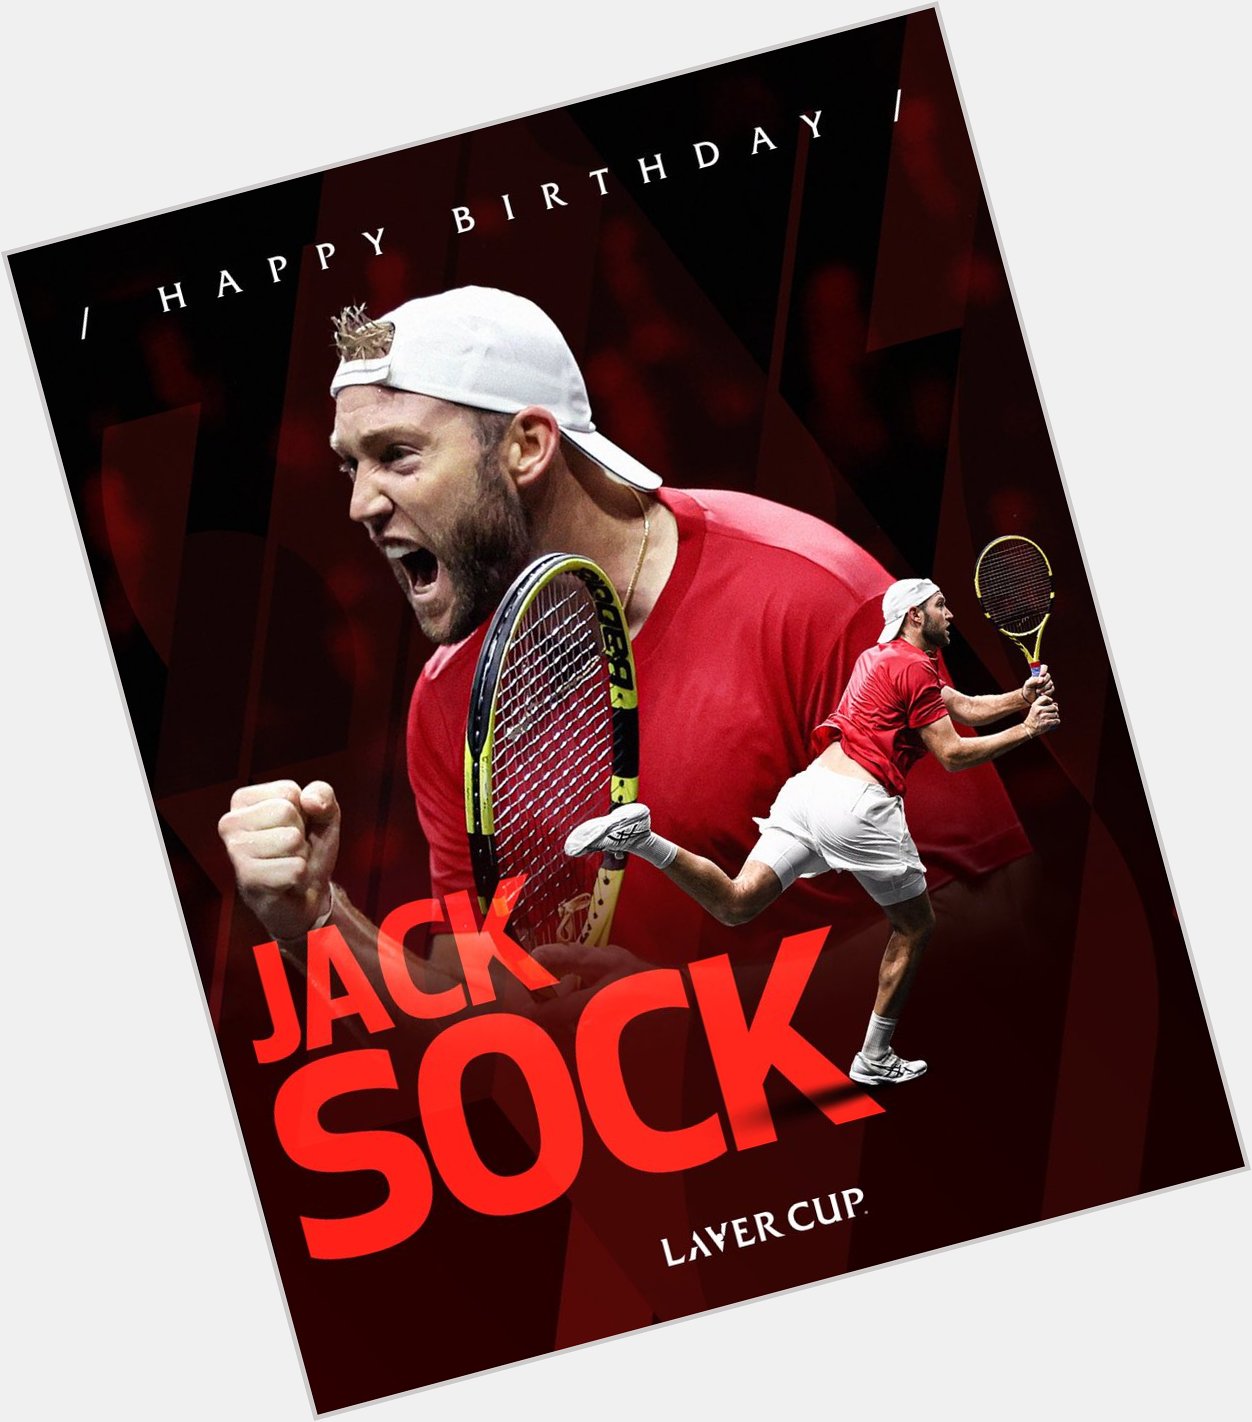 A memorable morning for a milestone birthday. 

Happy 30th, Jack Sock. 